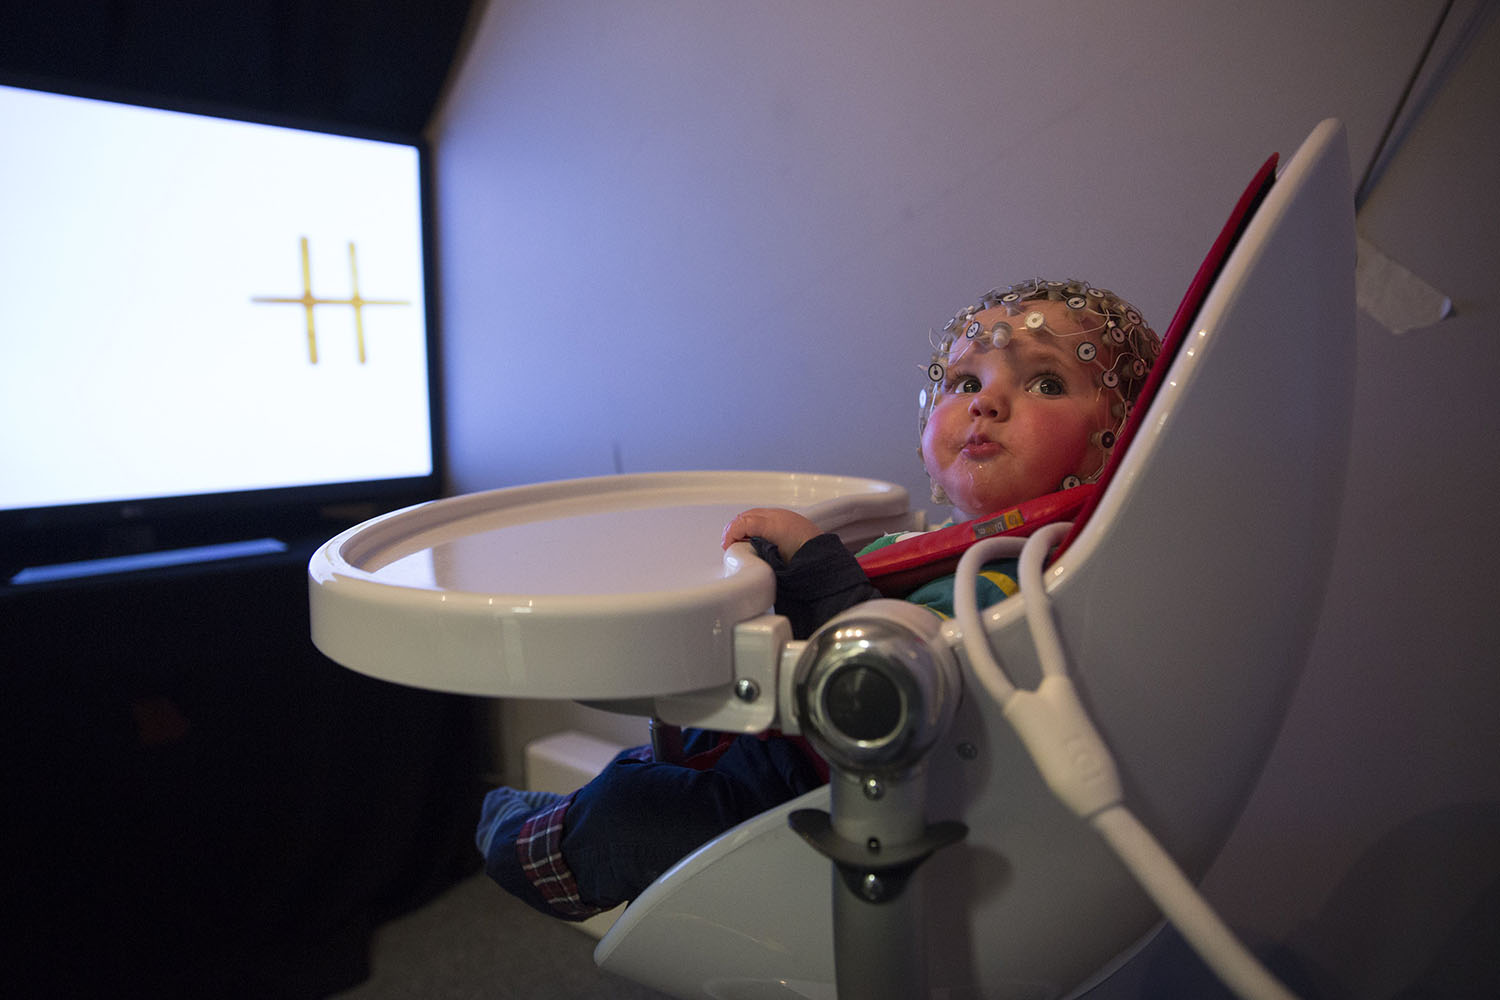 Mar. 3, 2014. Leo, aged 9 months, takes part in an experiment at the 'Birkbeck Babylab' Center for Brain and Cognitive Development in London, England.